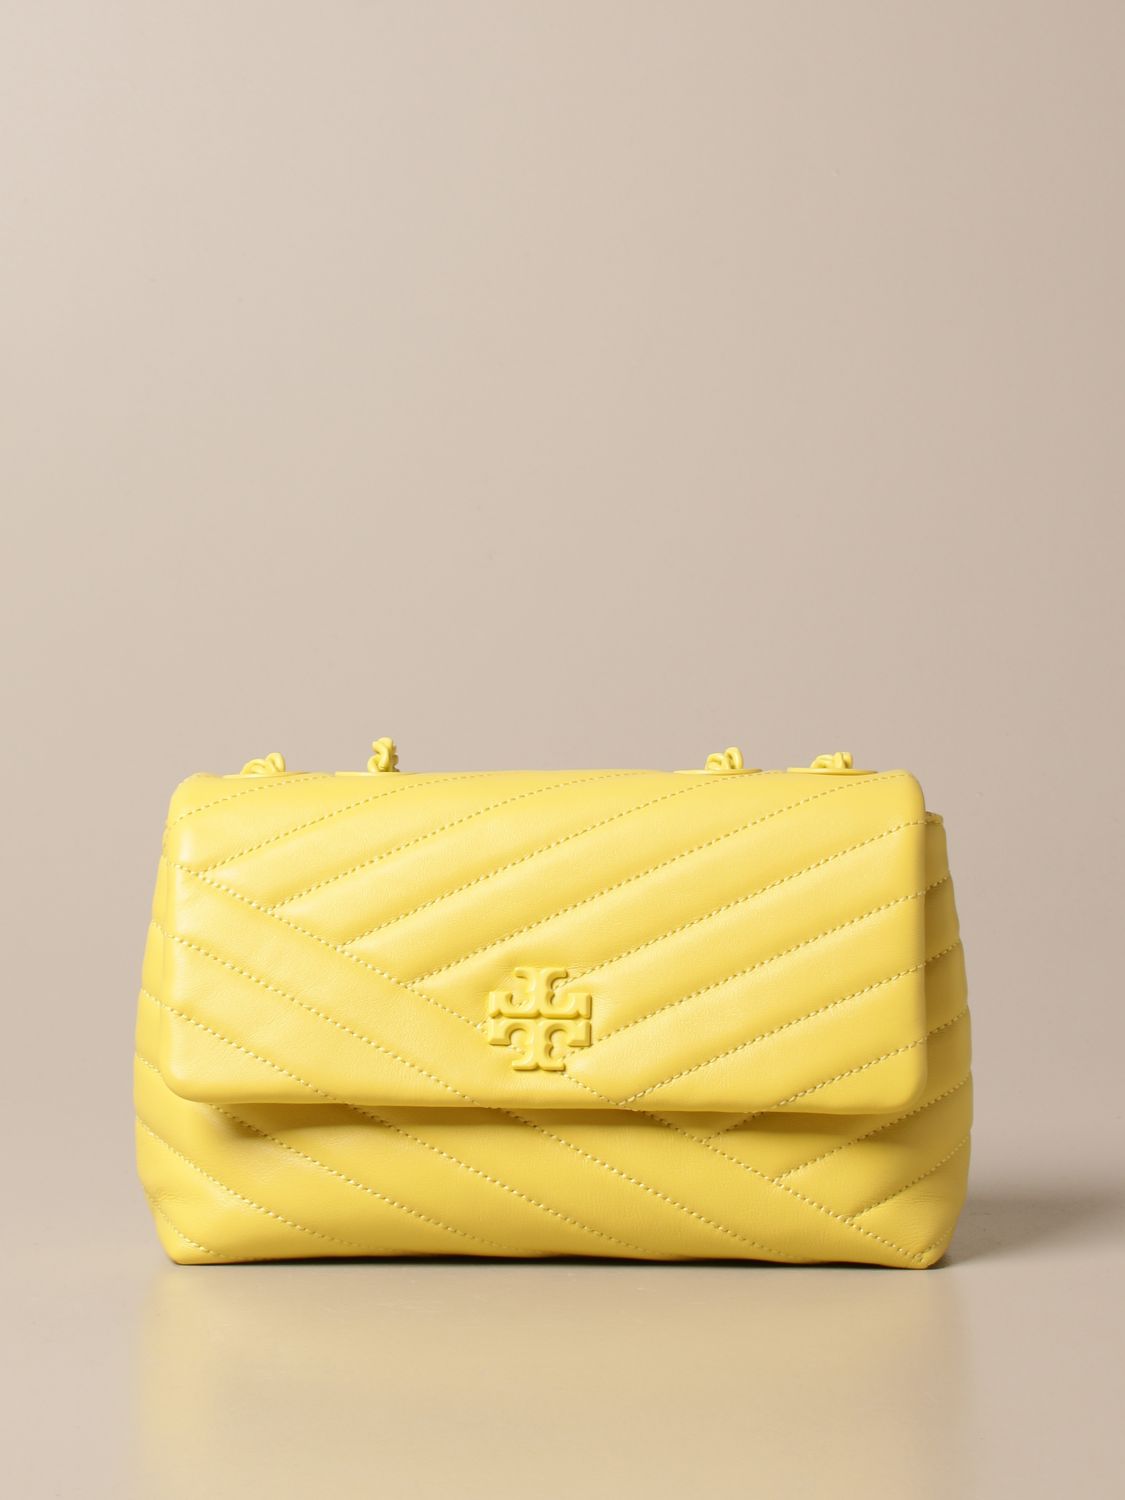 TORY BURCH: Kira bag in quilted leather - Yellow | Tory Burch shoulder bag  82285 online on 